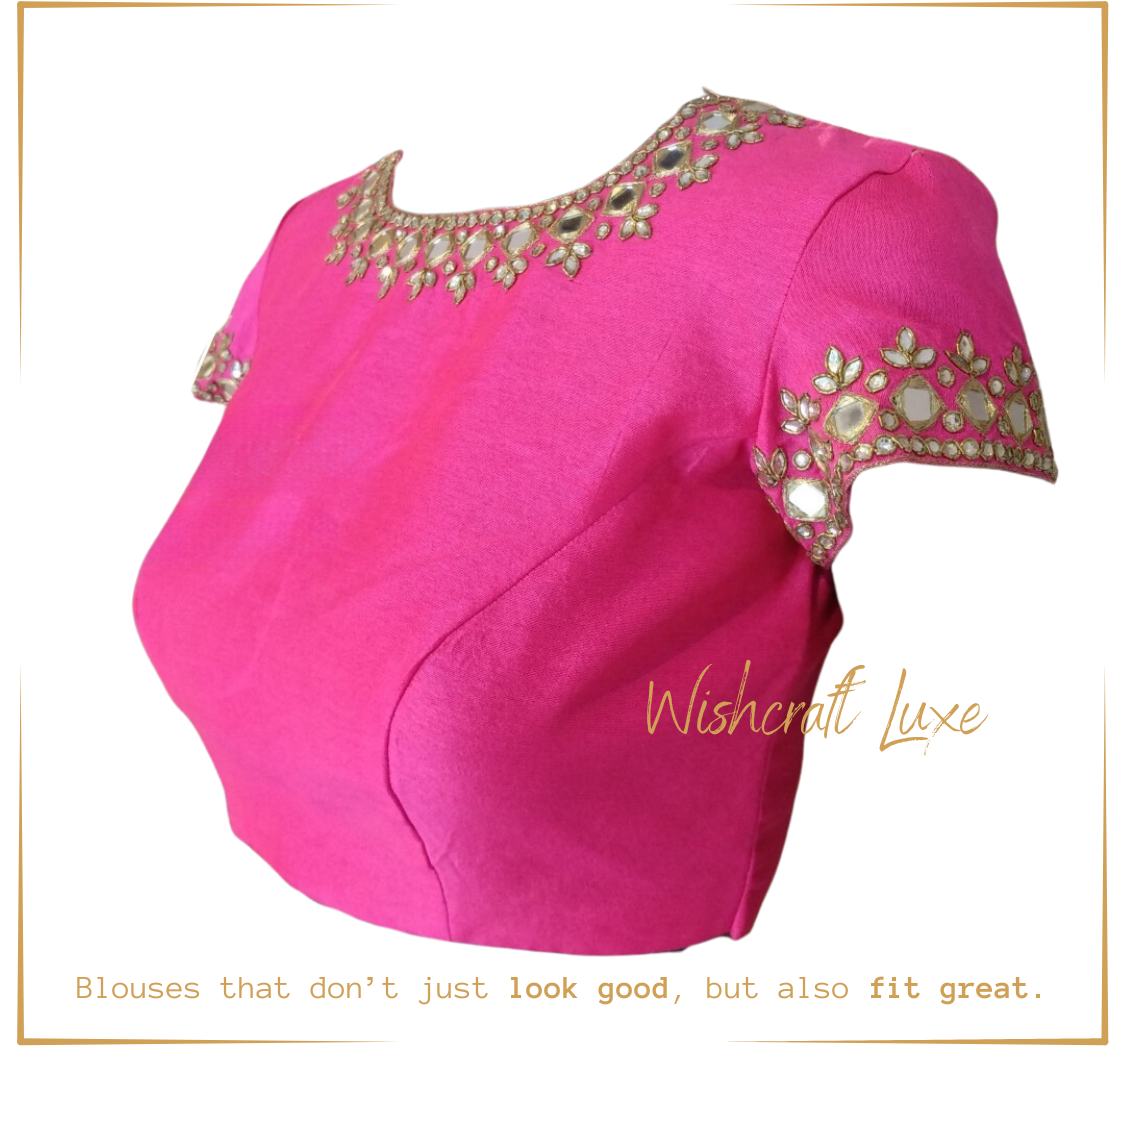 wishcraft luxe cover image of designer blouse in pink color